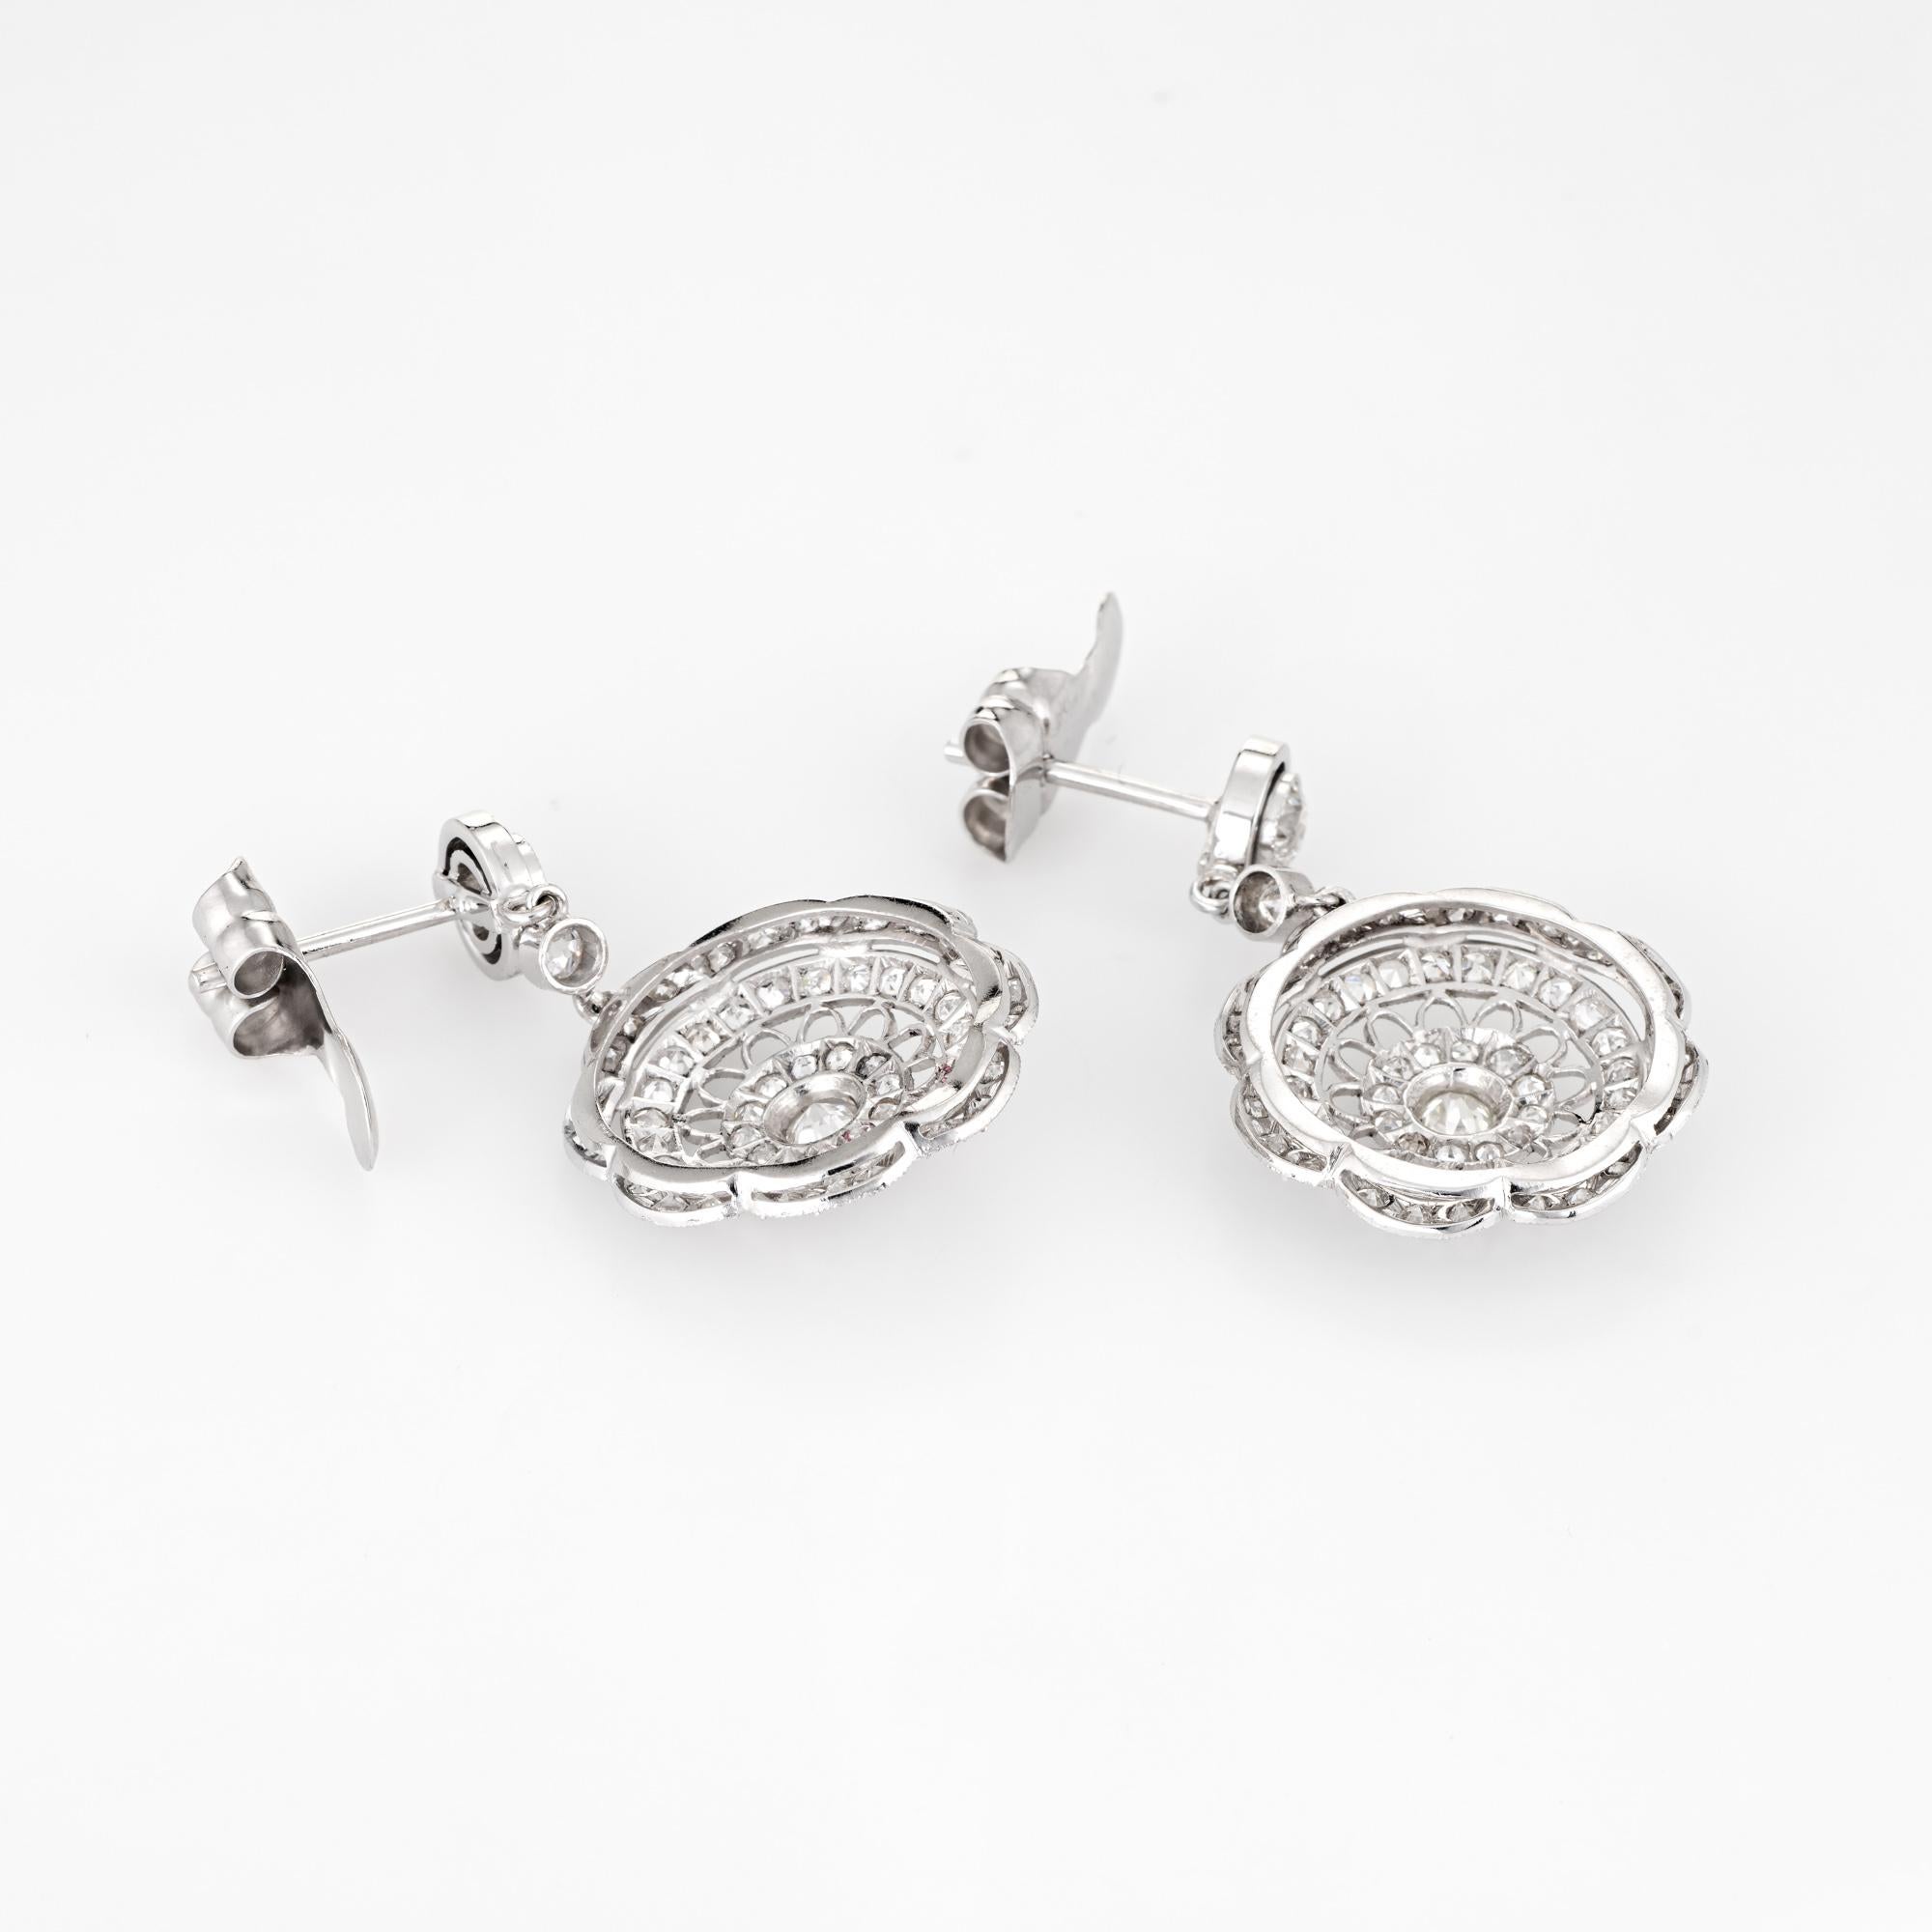 Elegant pair of estate diamond earrings crafted in 18k white gold. 

Single & old mine cut diamonds total an estimated 1.40 carats (estimated at I-J color and VS2-SI2 clarity).  

The diamonds are set into round openwork filigree mounts, overlaid